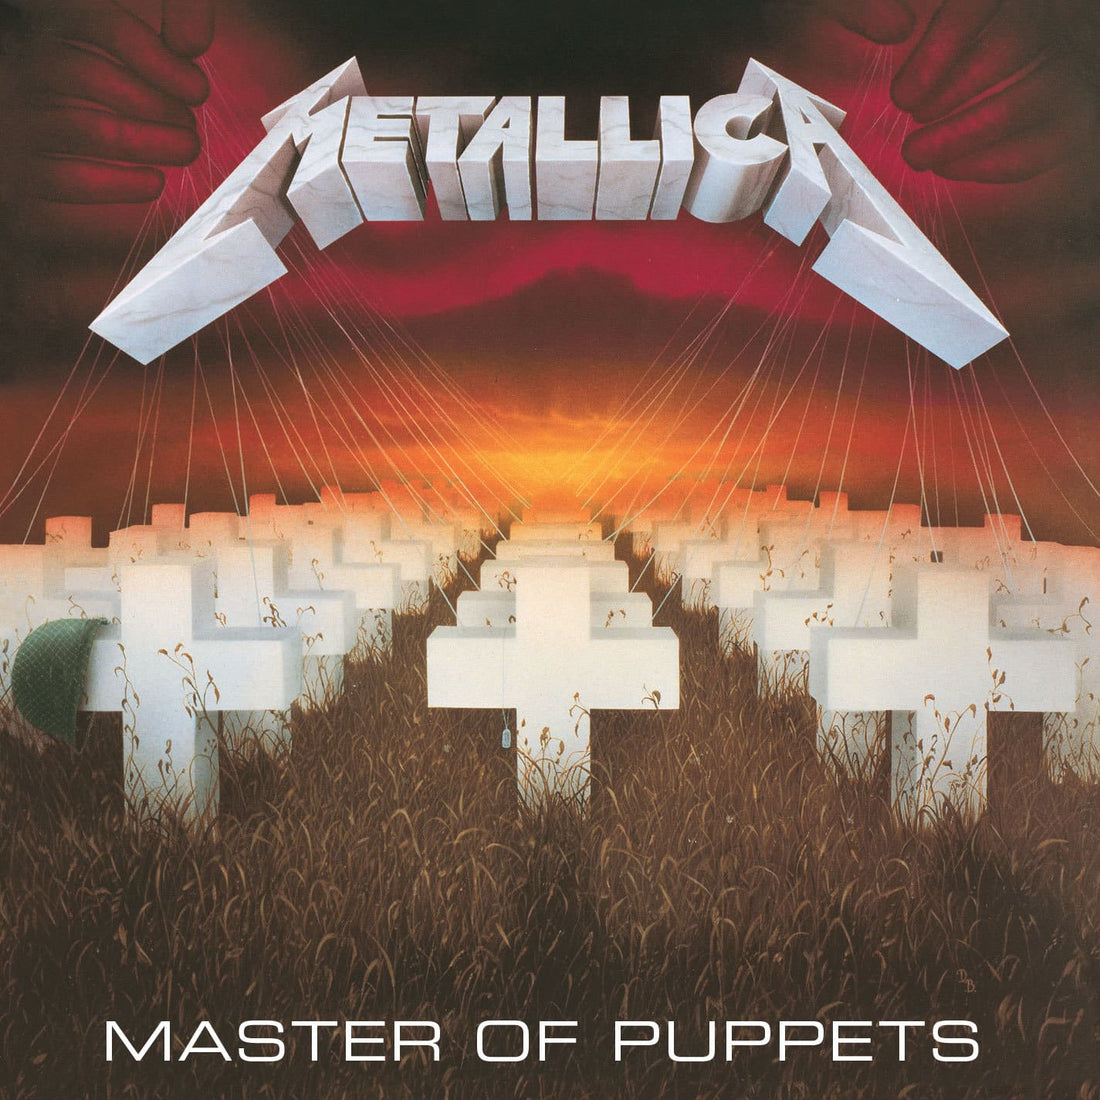 Metallica's 'Master of Puppets' one of the greatest metal albums Official Merchandise Store